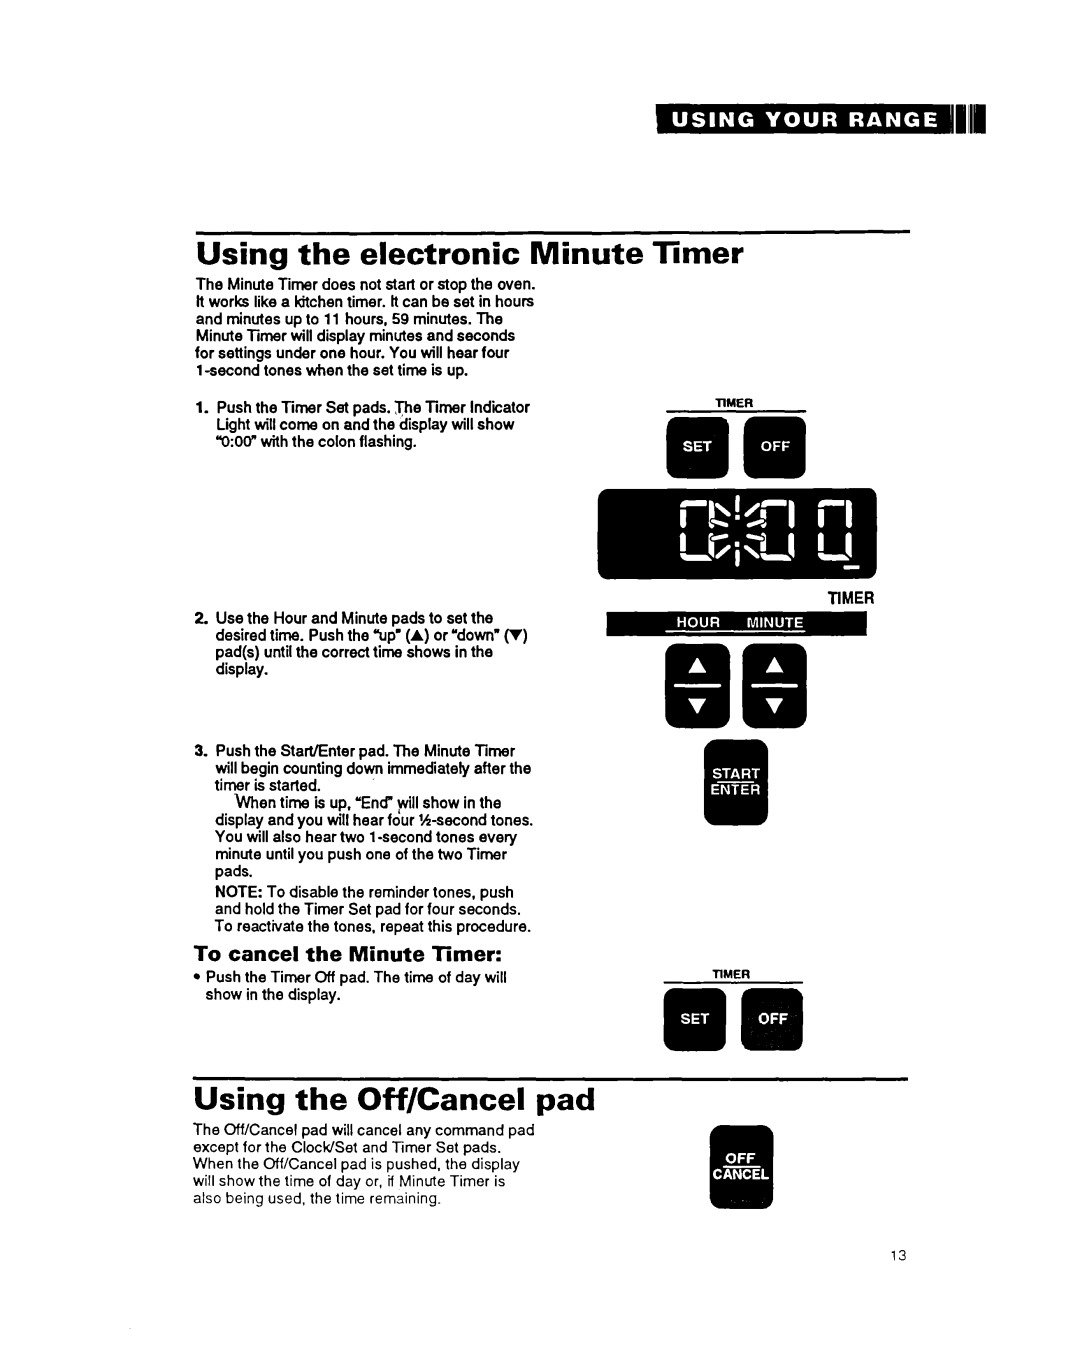 Whirlpool RF376PXY warranty Using the electronic Minute Timer, Using the Off/Cancel pad, To cancel the Minute Timer 